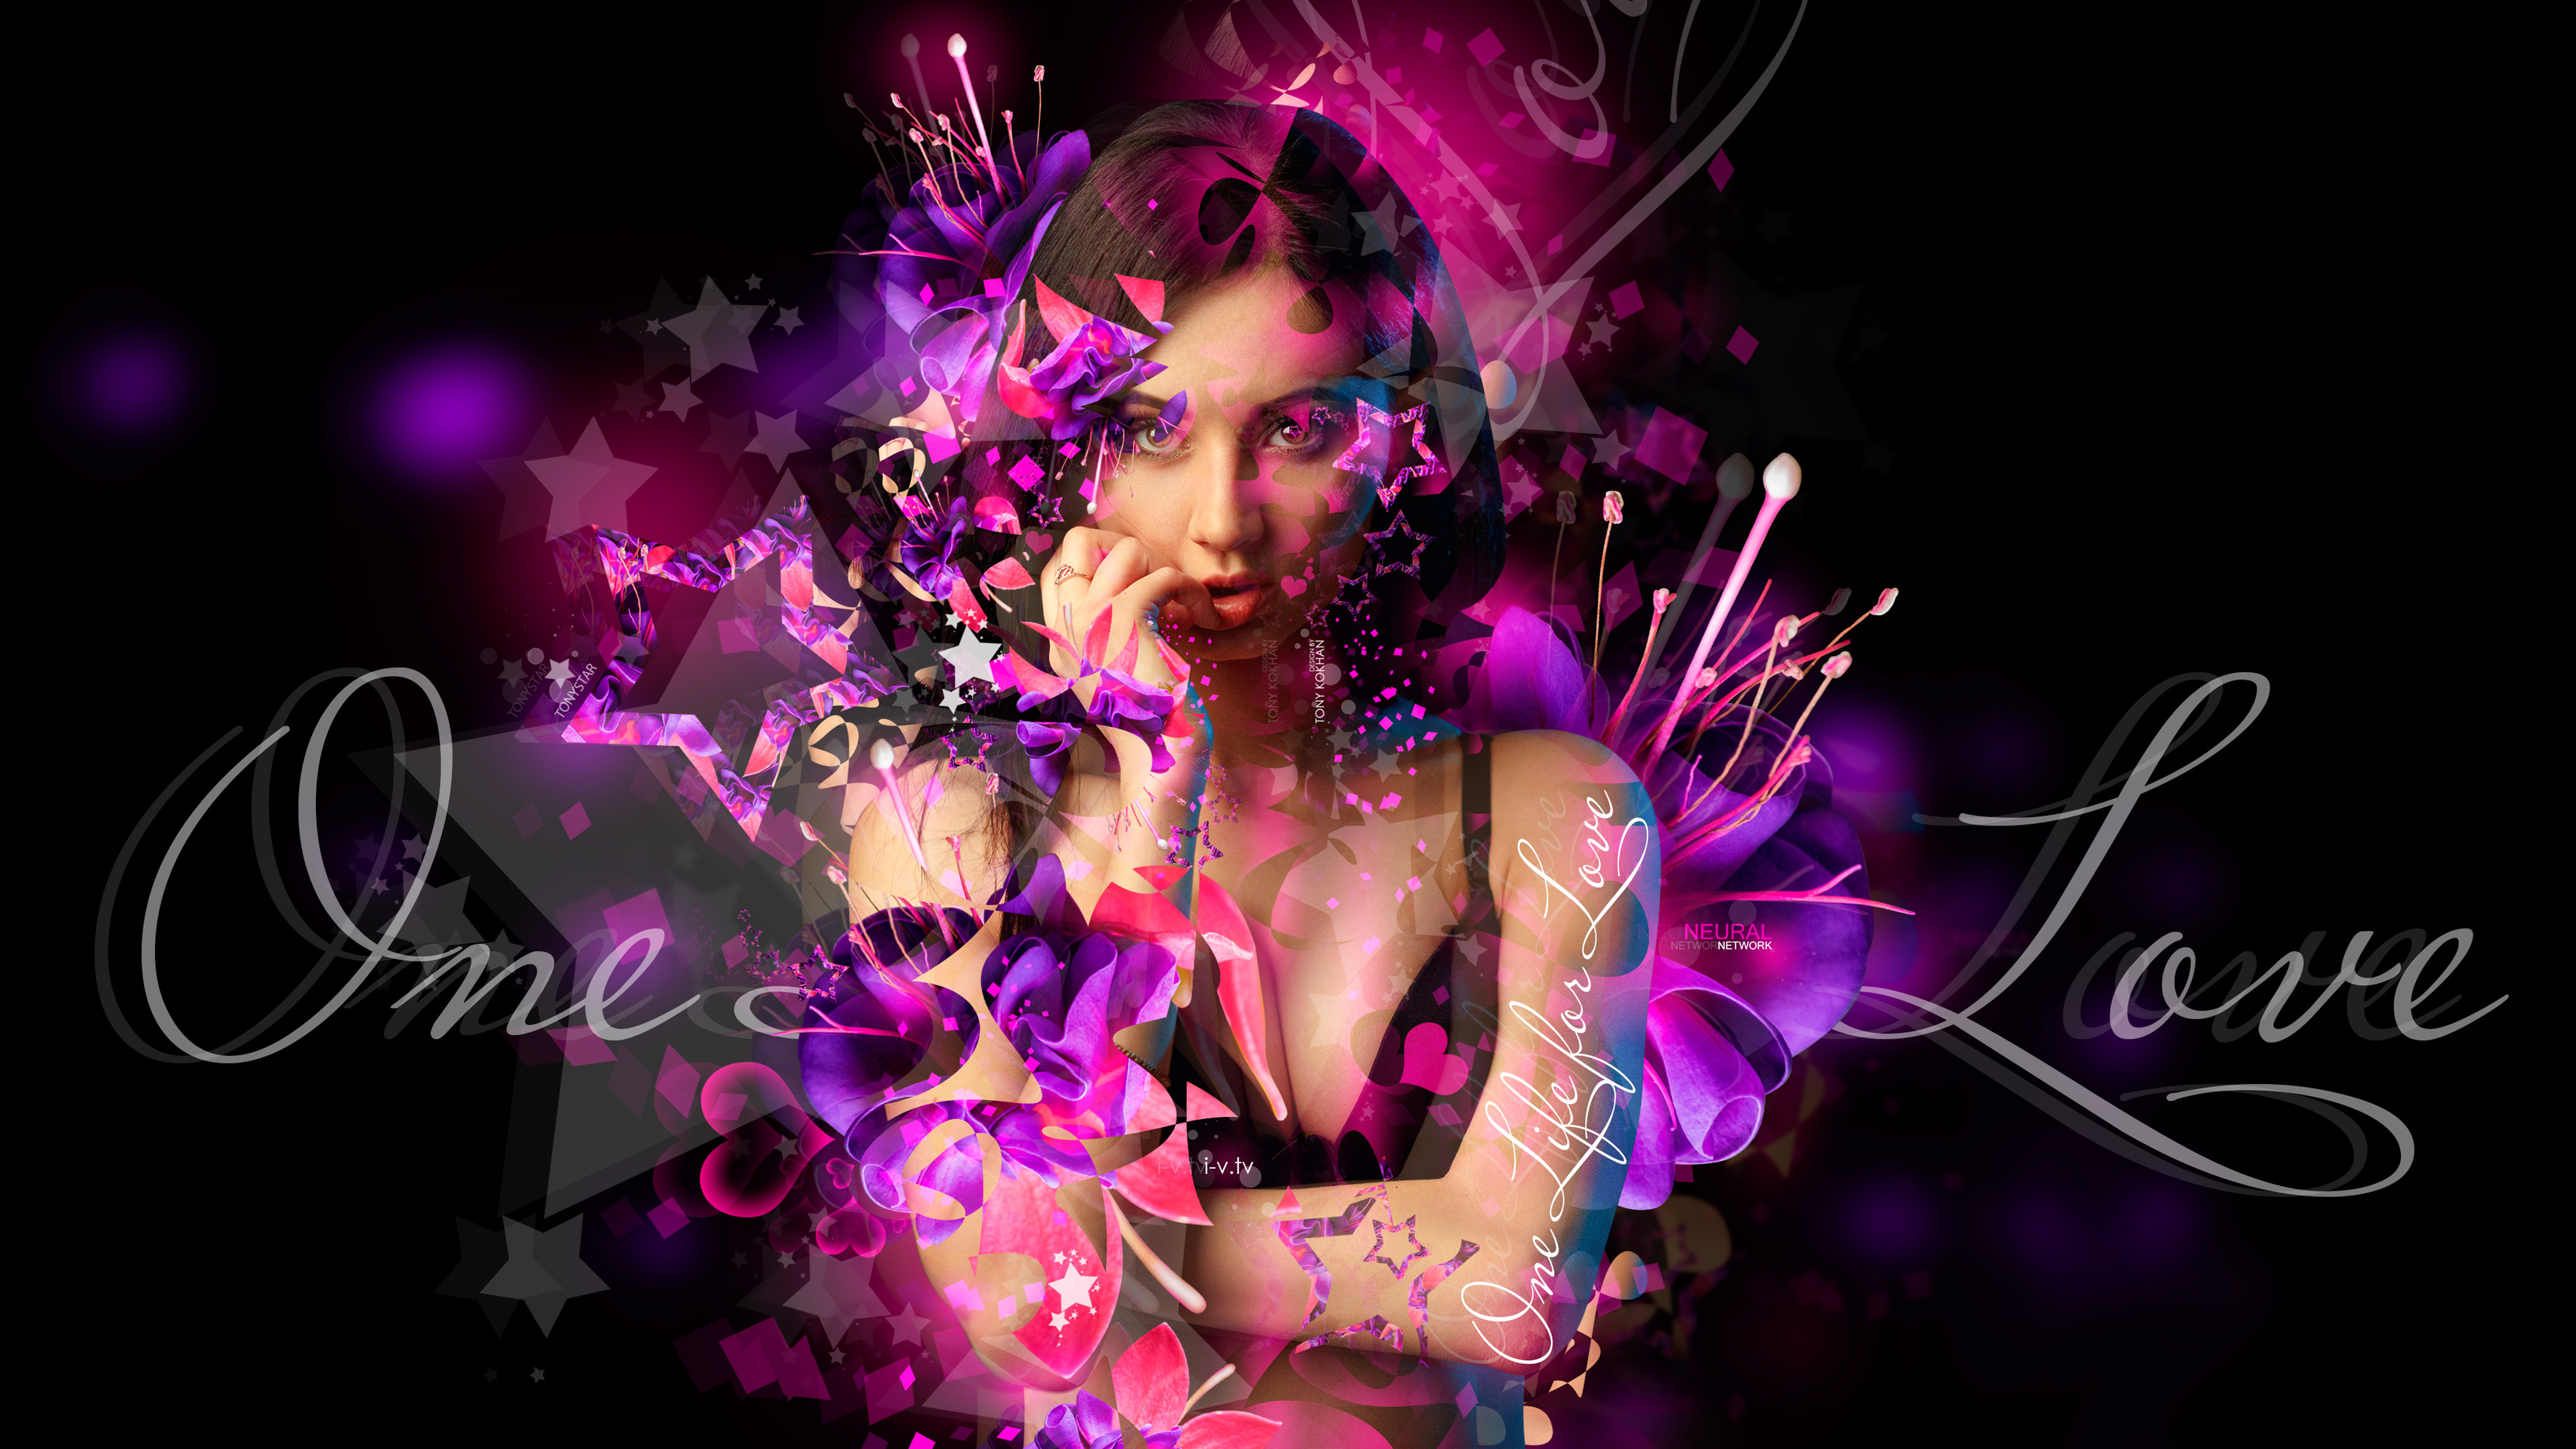 Neural-Network-Fantasy-Girl-Front-TonyFlowers-Super-Effects-Tattoo-Words-One-Life-For-Love-TonyStar-Art